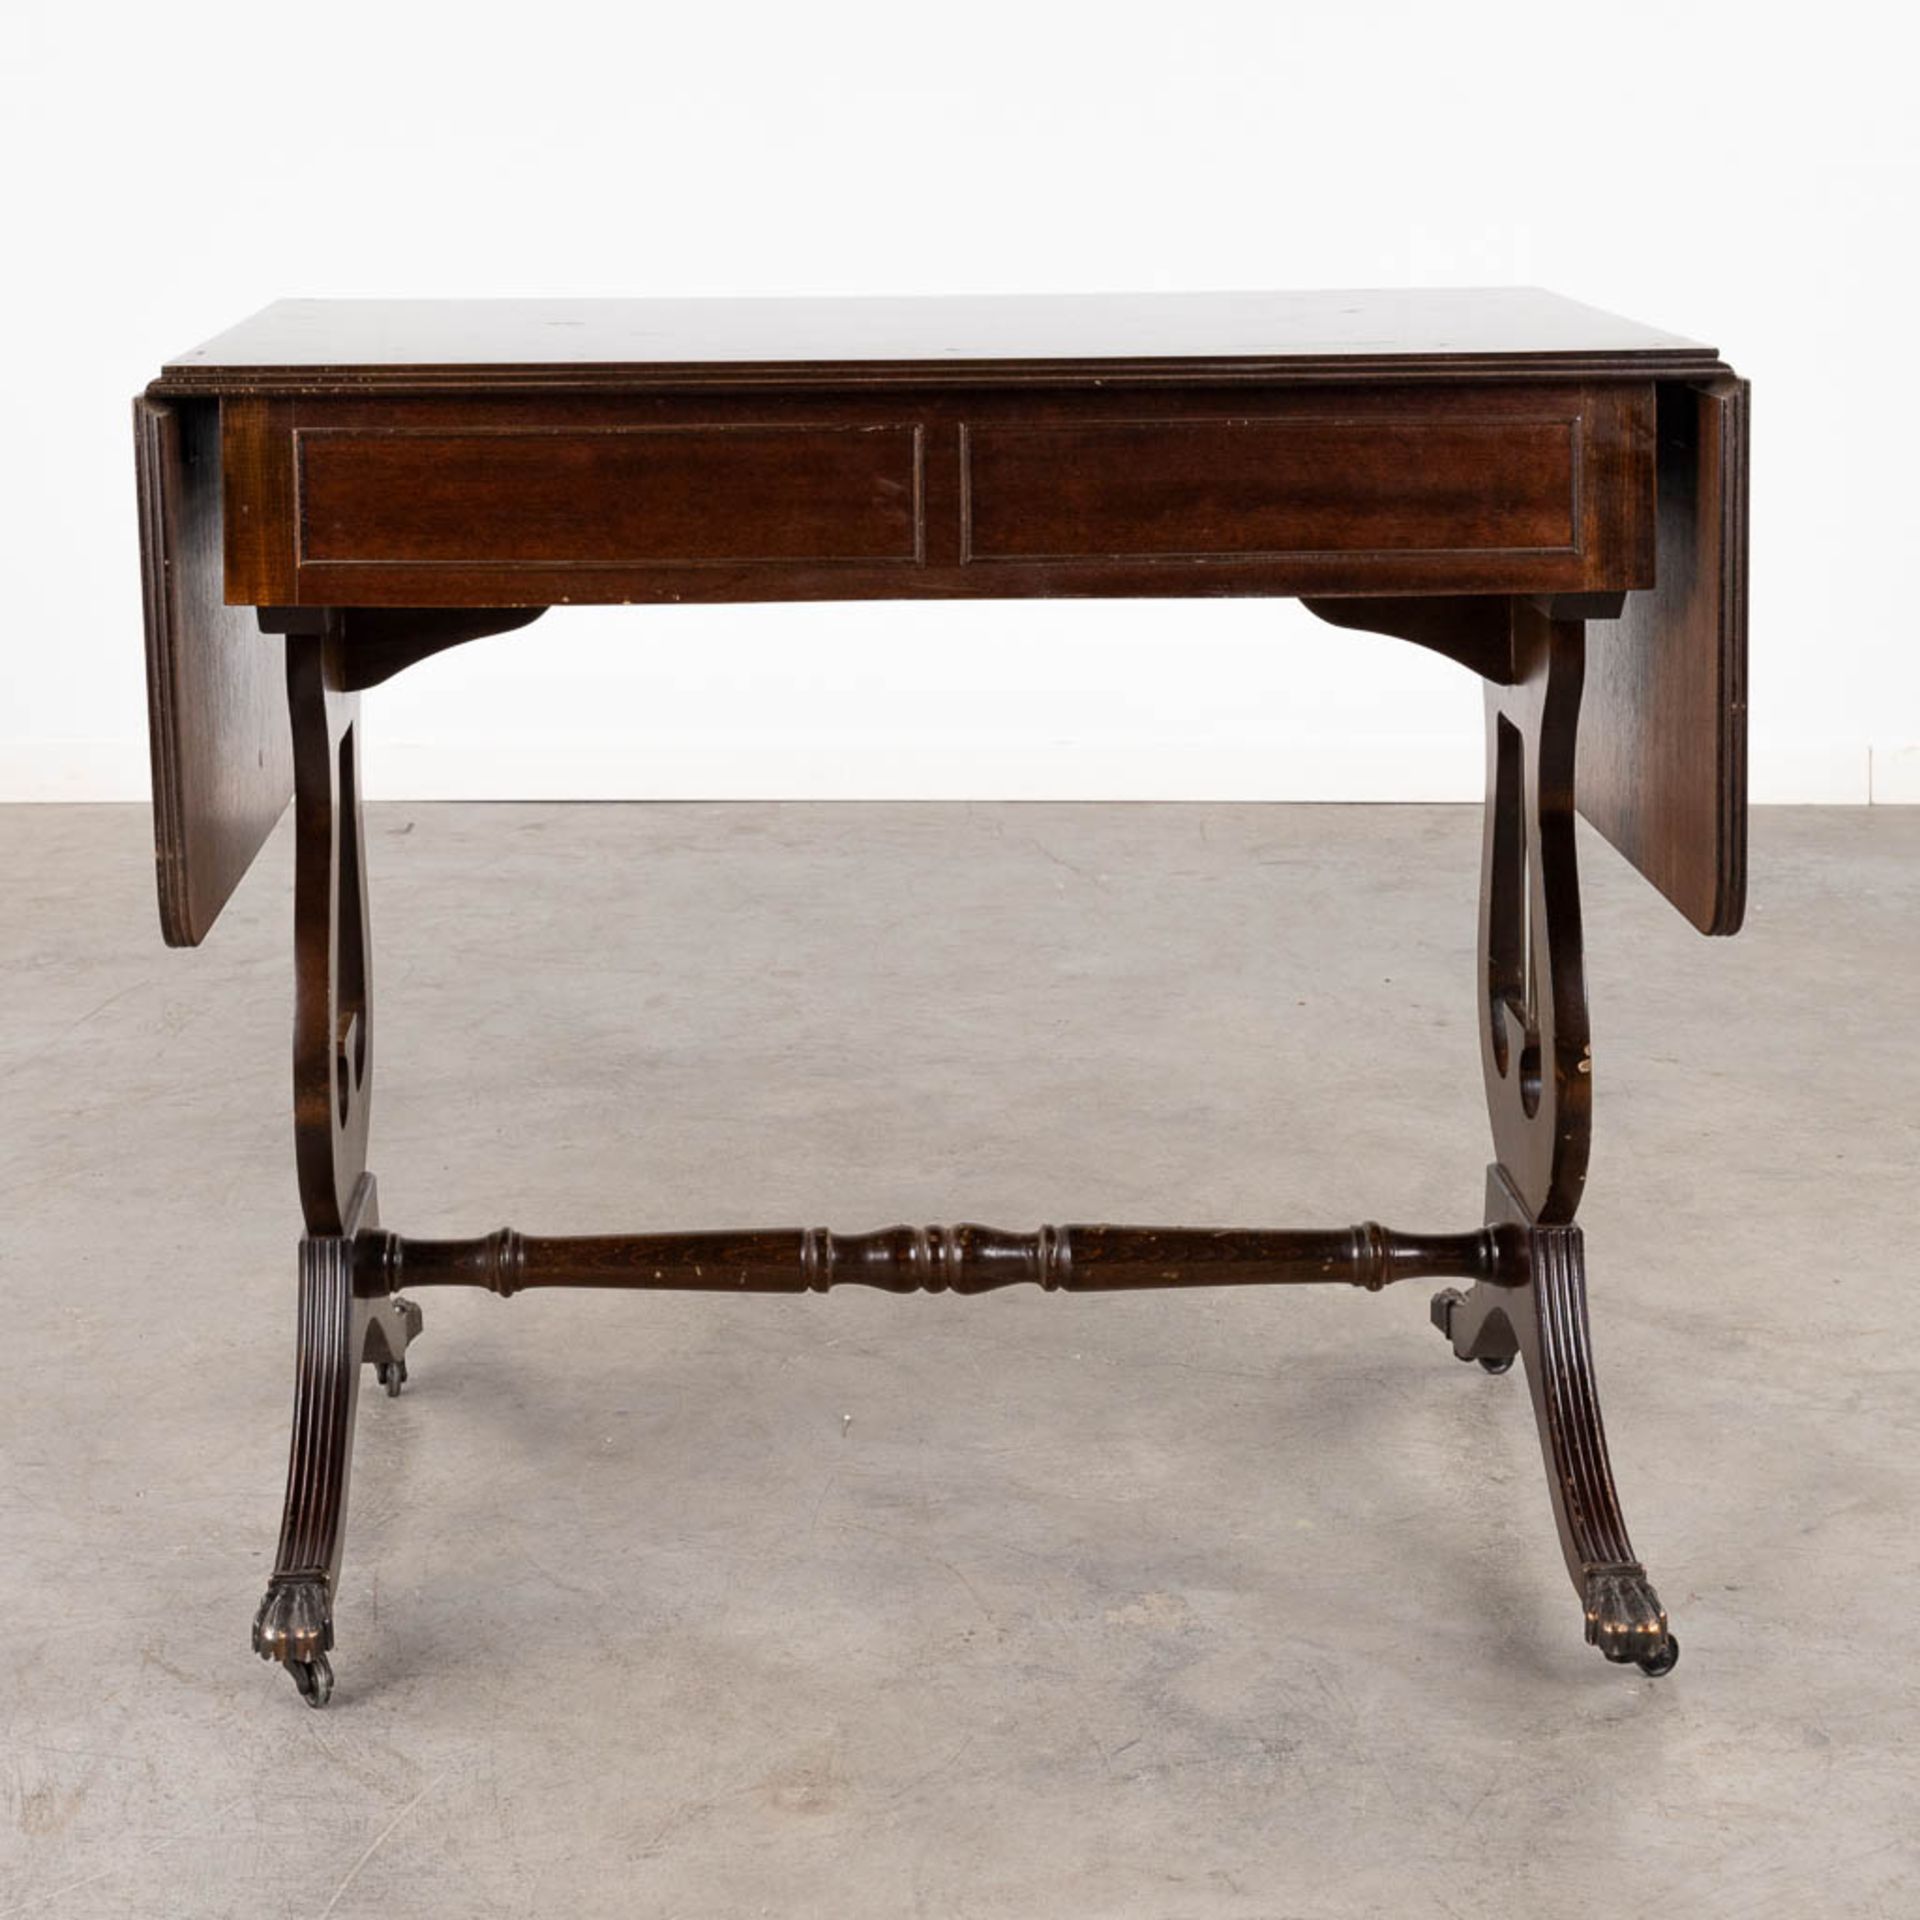 An English drop-leaf desk, decorated with a lire. 20th C. (D:51 x W:150 x H:75 cm) - Image 7 of 15